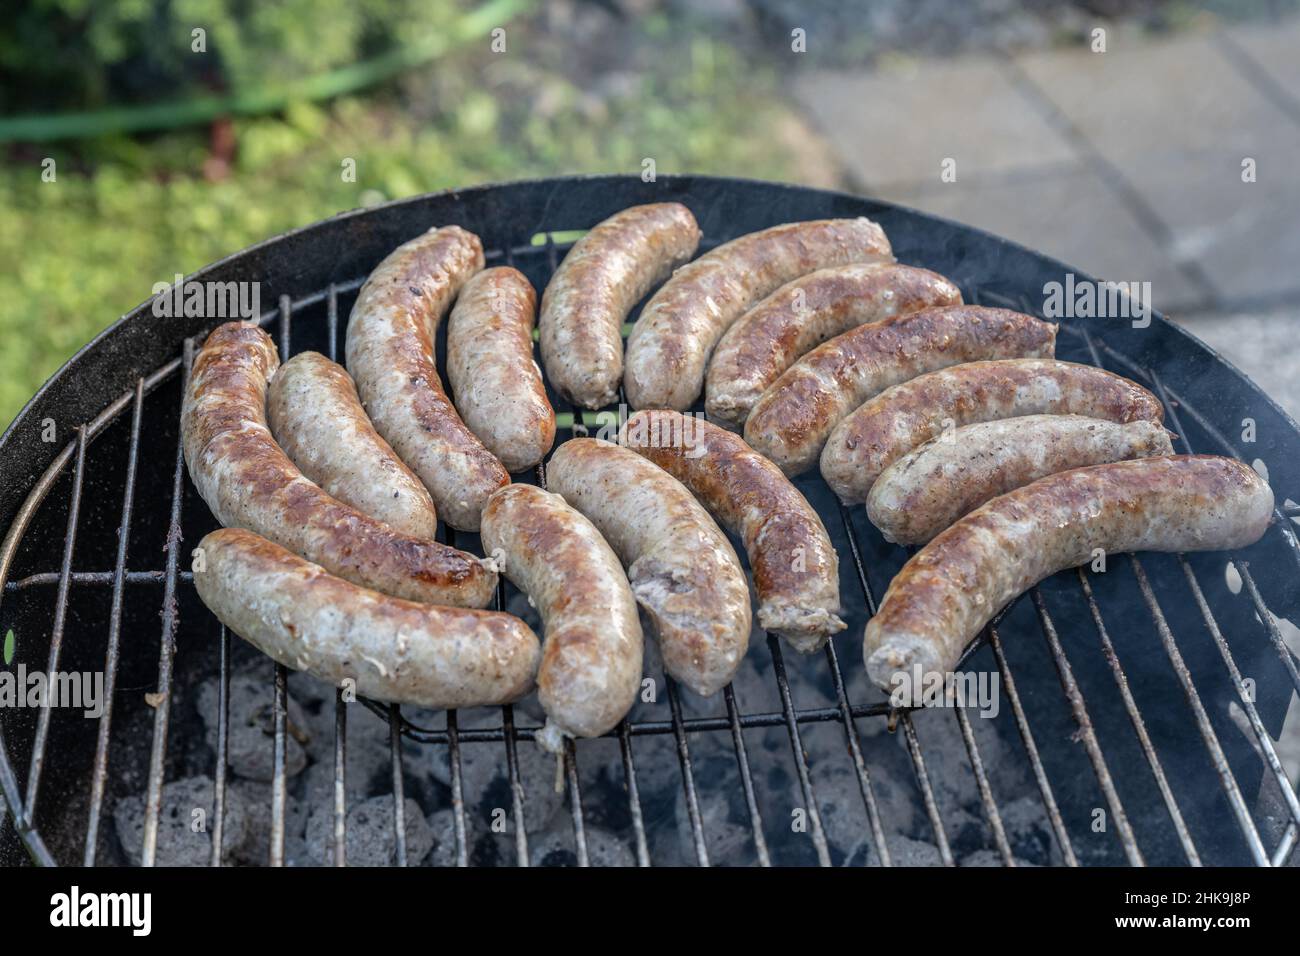 Barbecue grill bbq on coal charcoal grill with raw bratwurst sausages meat delicious summer meal. Stock Photo